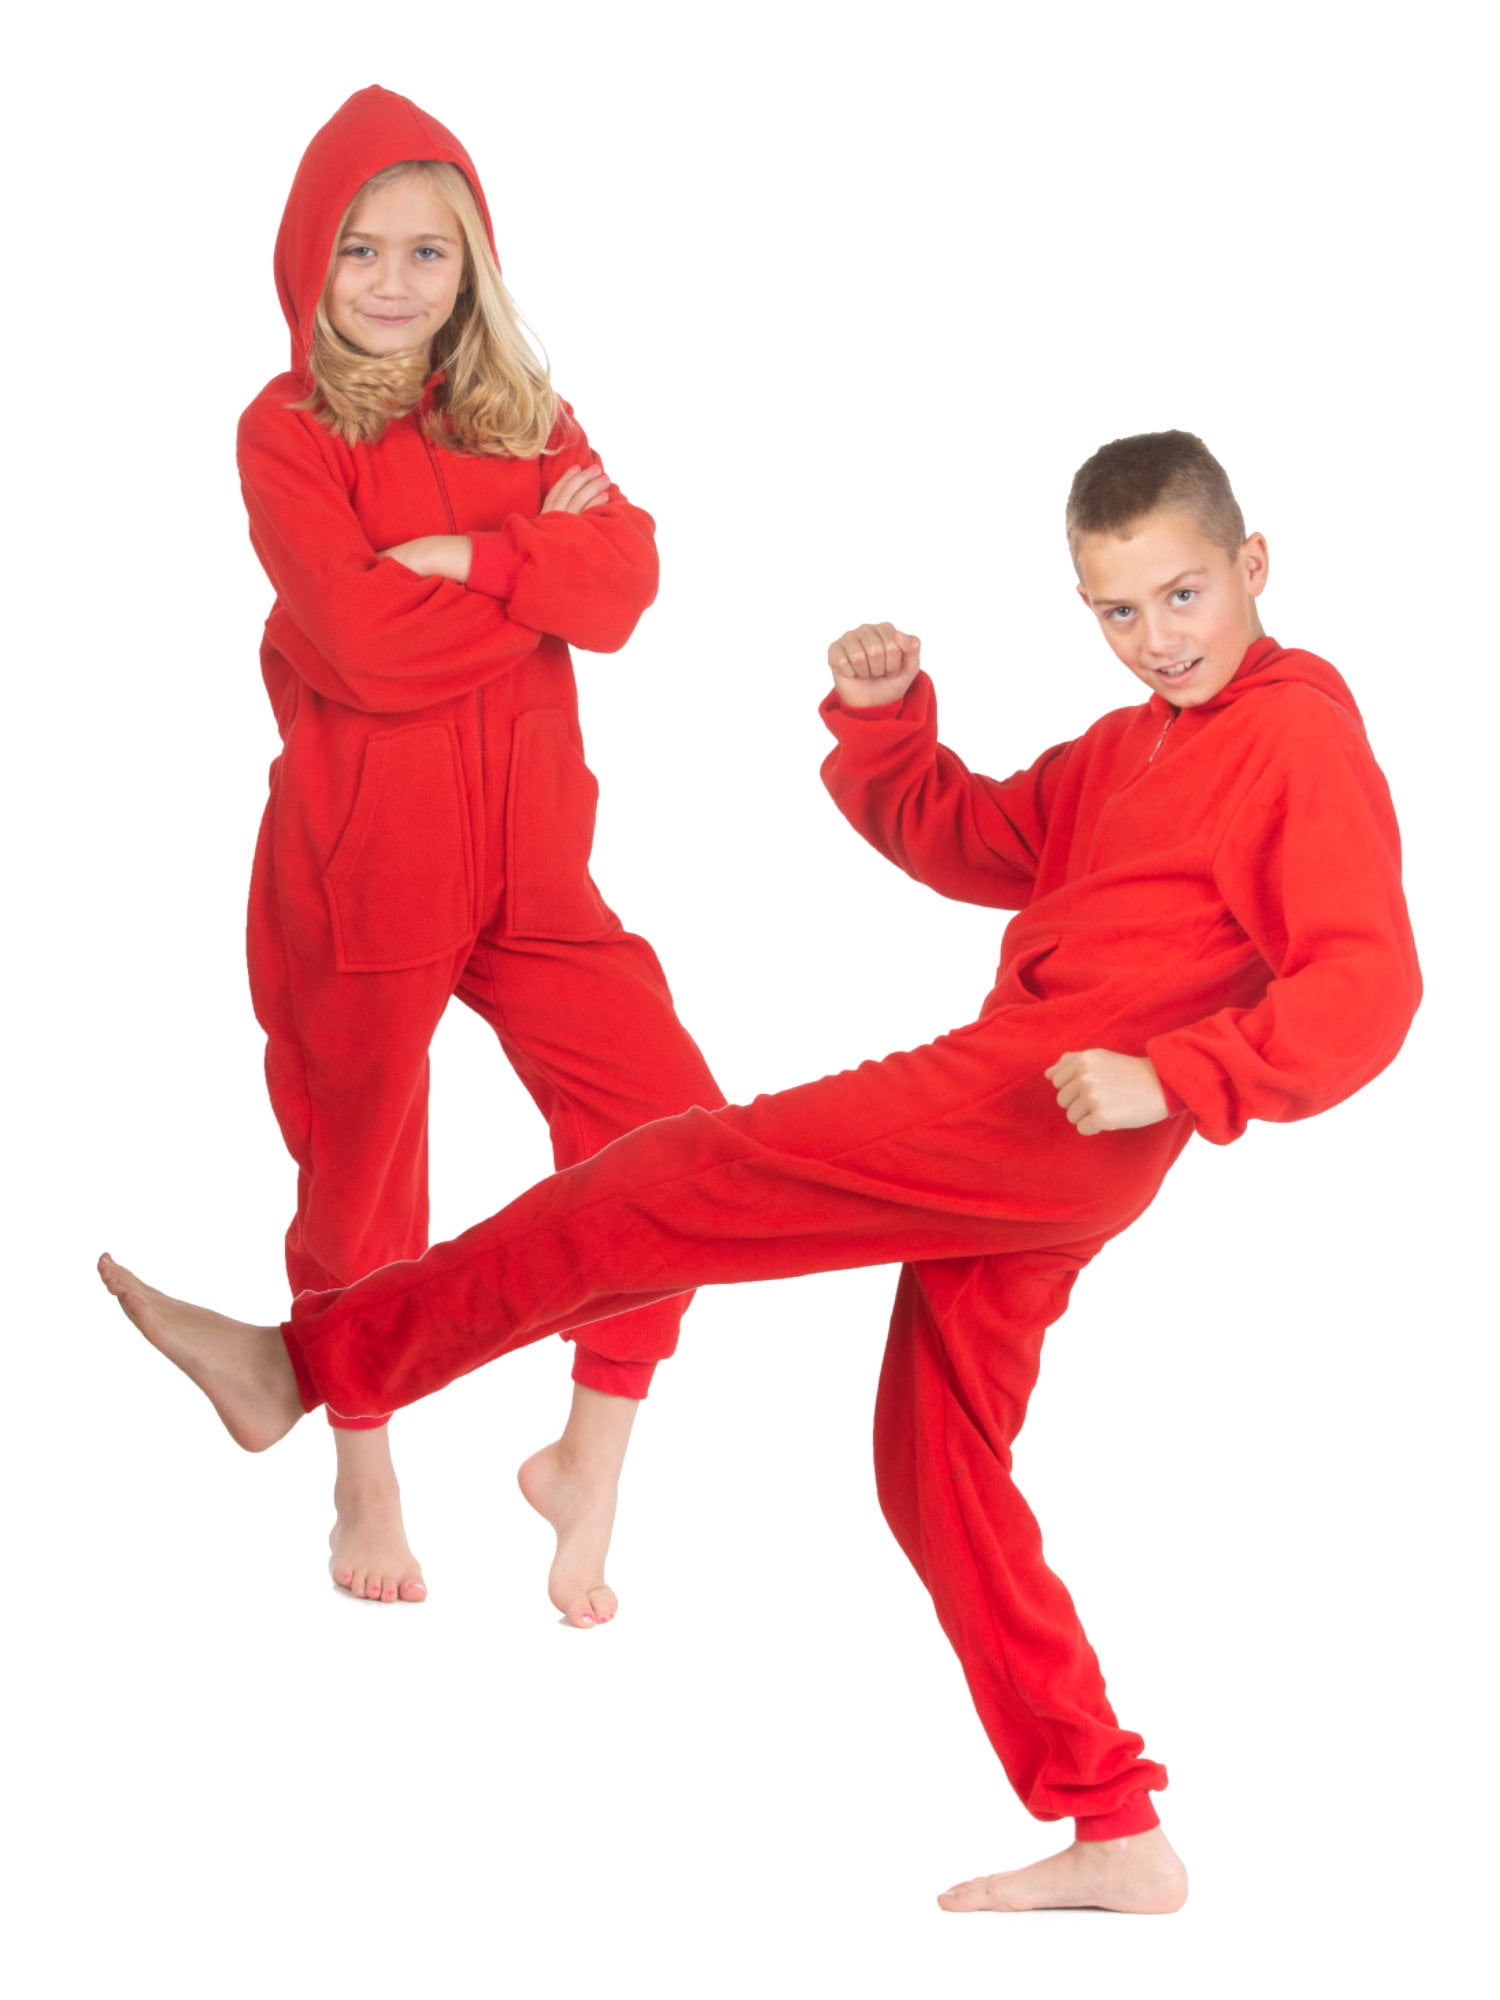 Unisex Kids Fleece Onesies One-Piece Pajama Jumpsuits for Baby Boys and Girls Pjs Footed Pajamas 